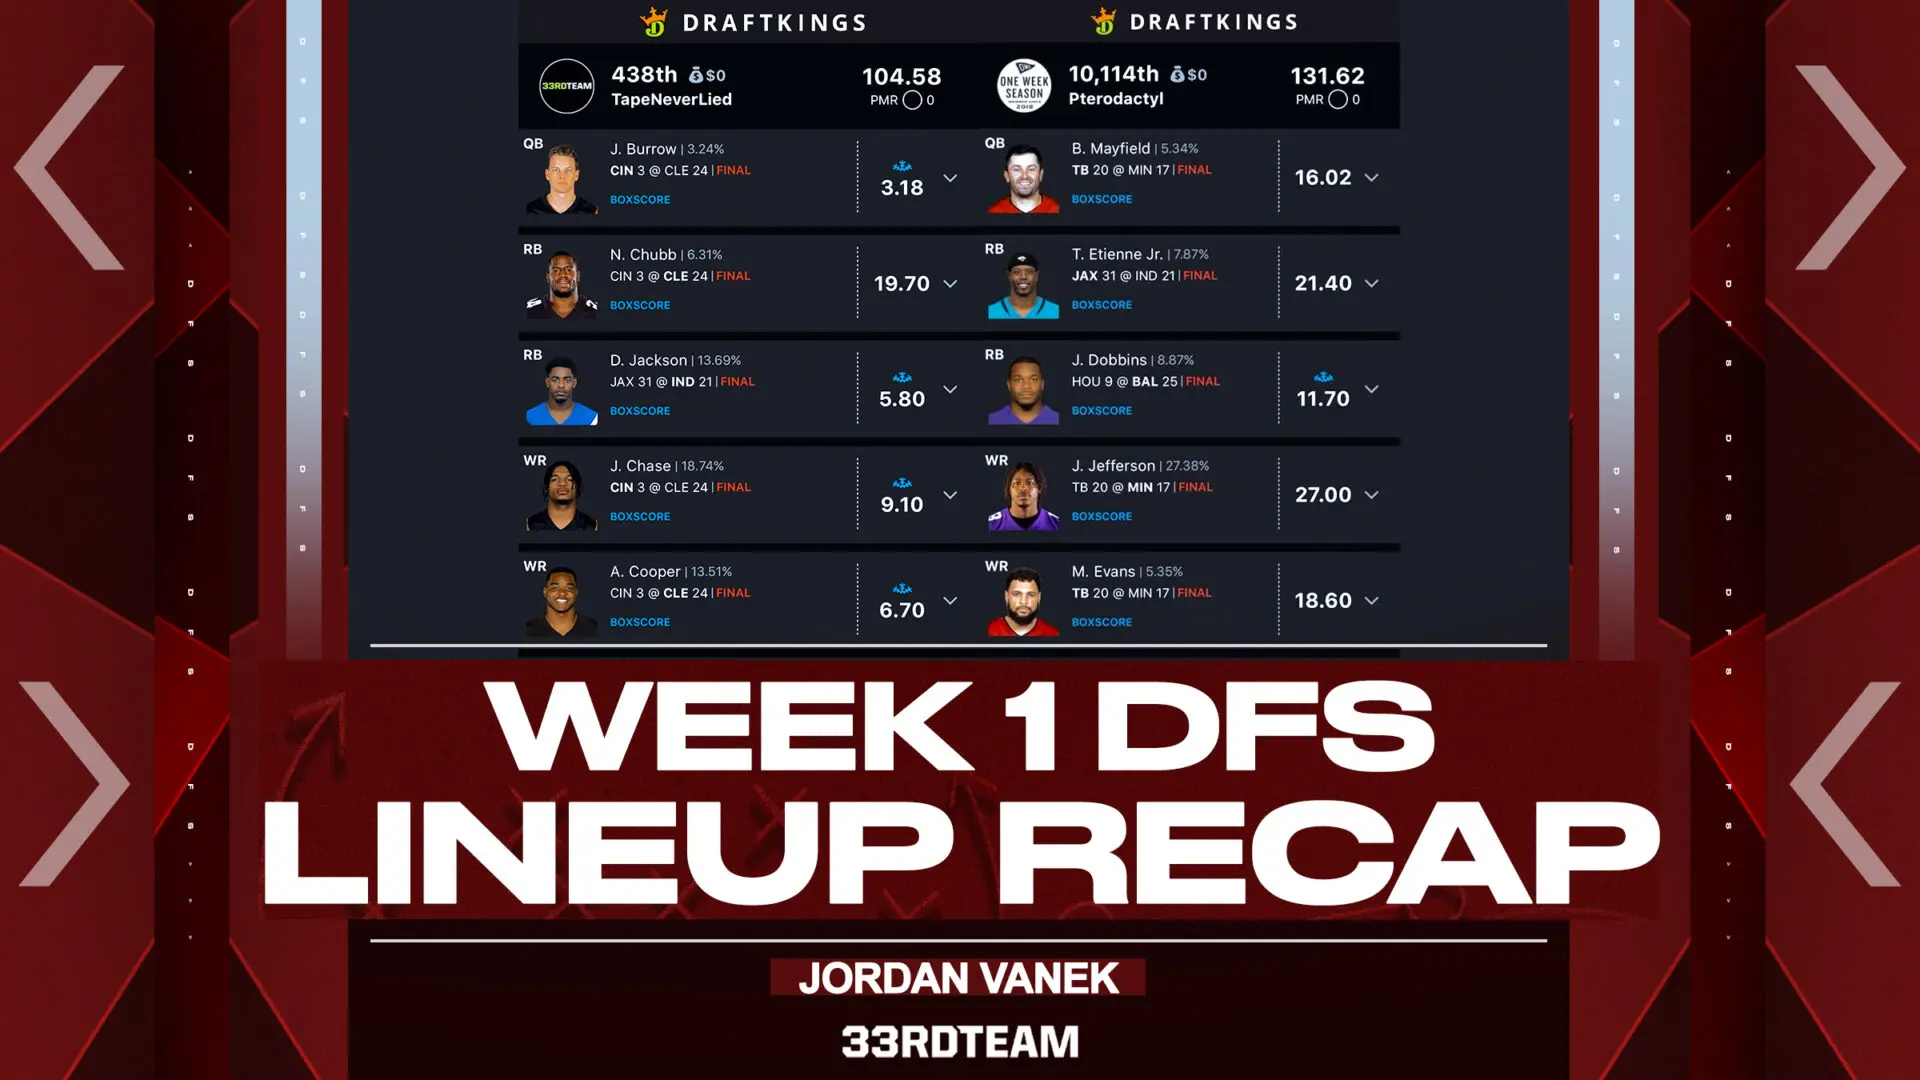 Dolphins-Bengals Week 4 DFS lineups: Fantasy Football Today analysts share  picks, daily lineups for TNF 